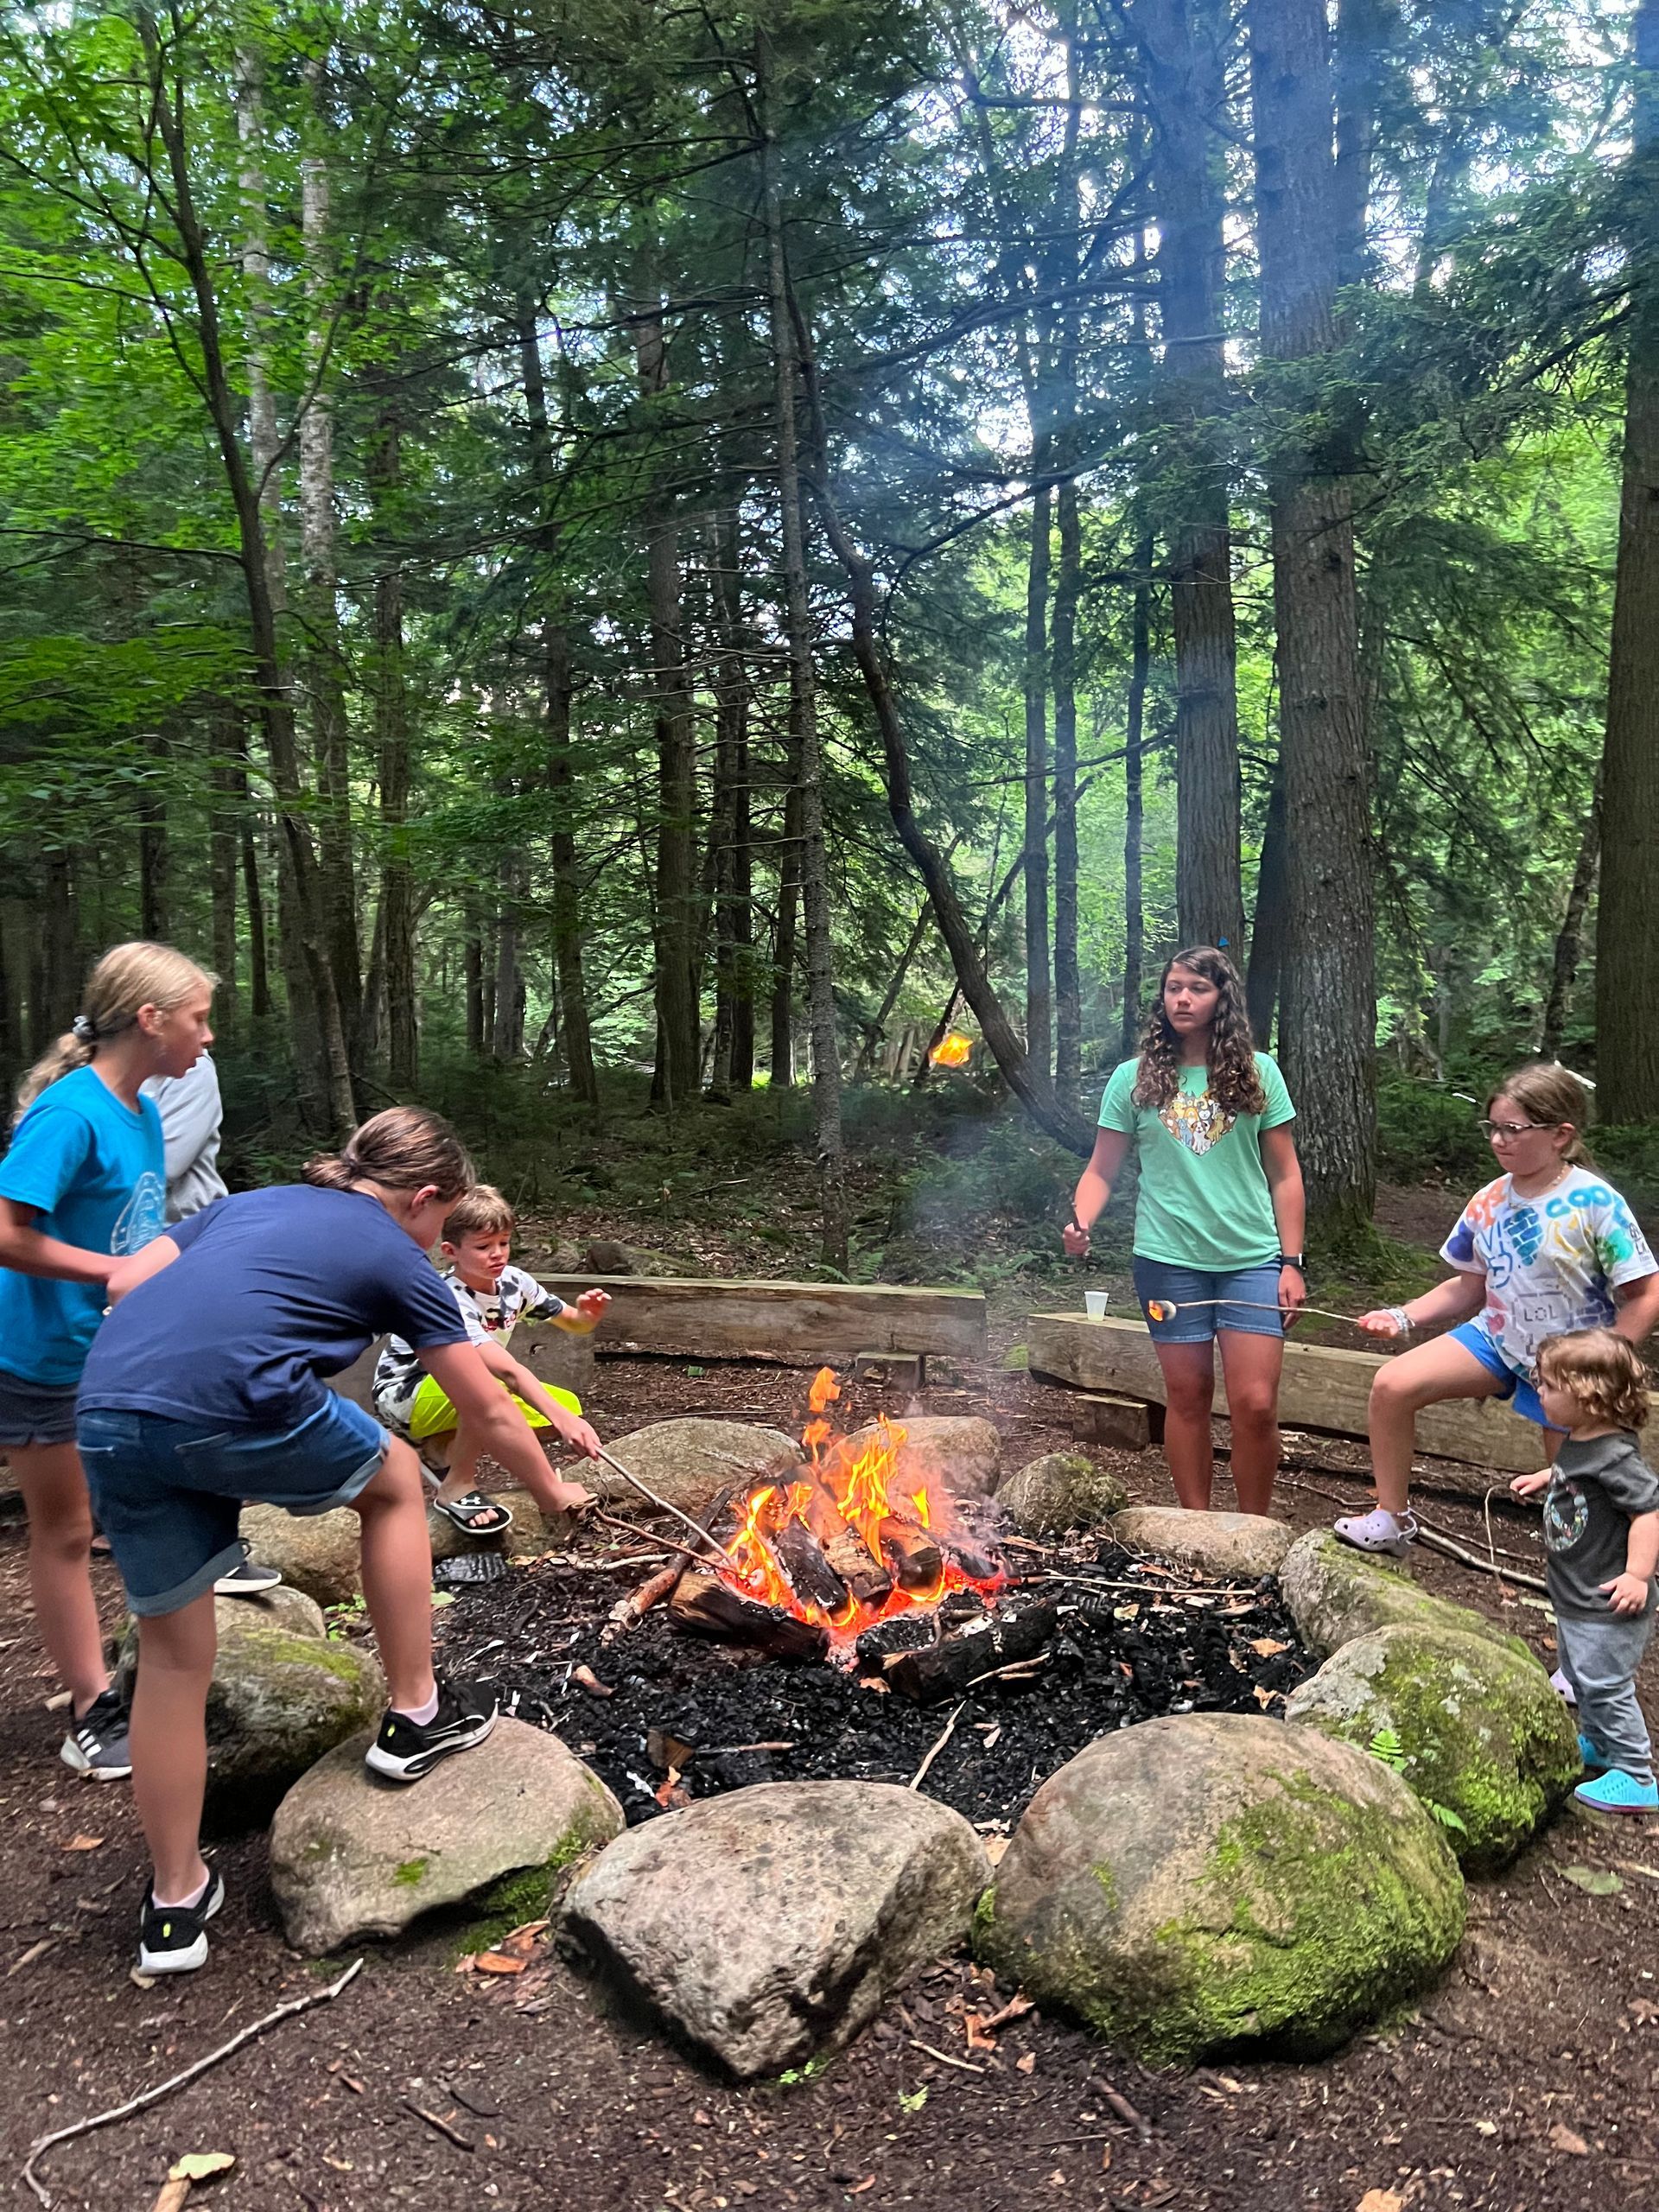 a group of children are playing around a campfire in the woods .